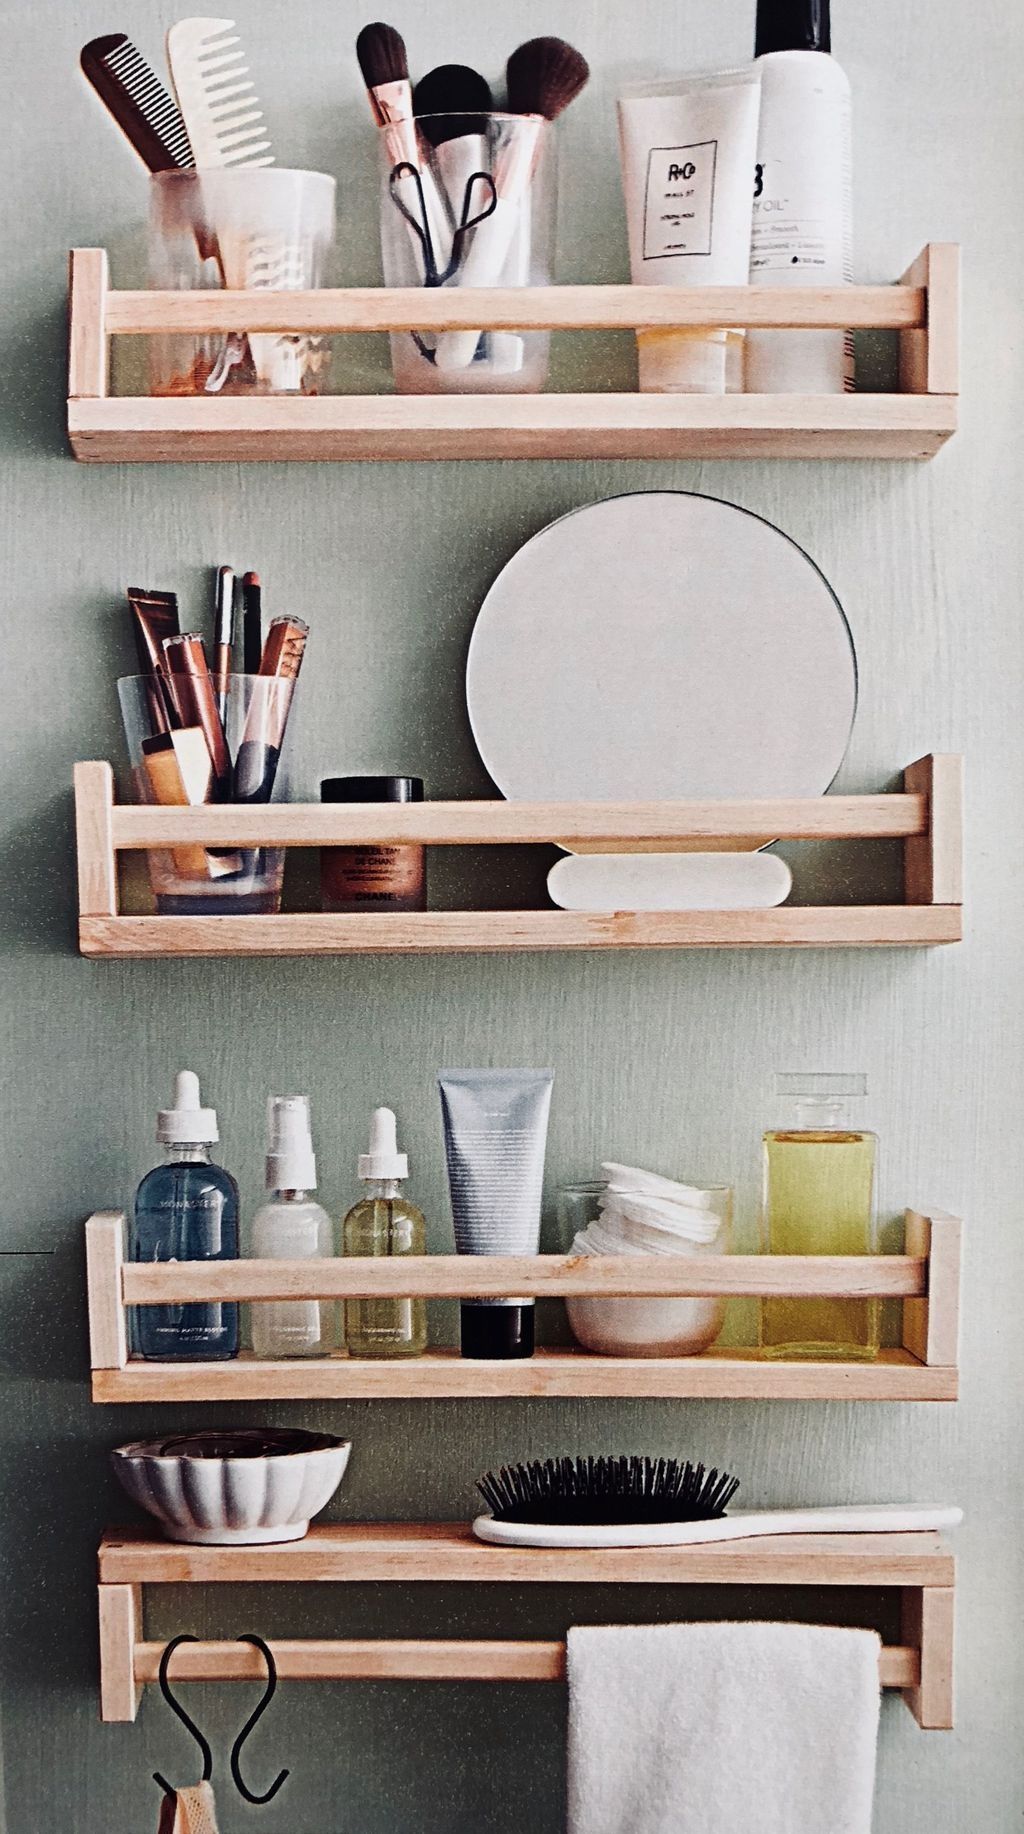 How to Make Hanging Bathroom Storage for Small Spaces - How to Make Hanging Bathroom Storage for Small Spaces -   16 diy Shelves small spaces ideas